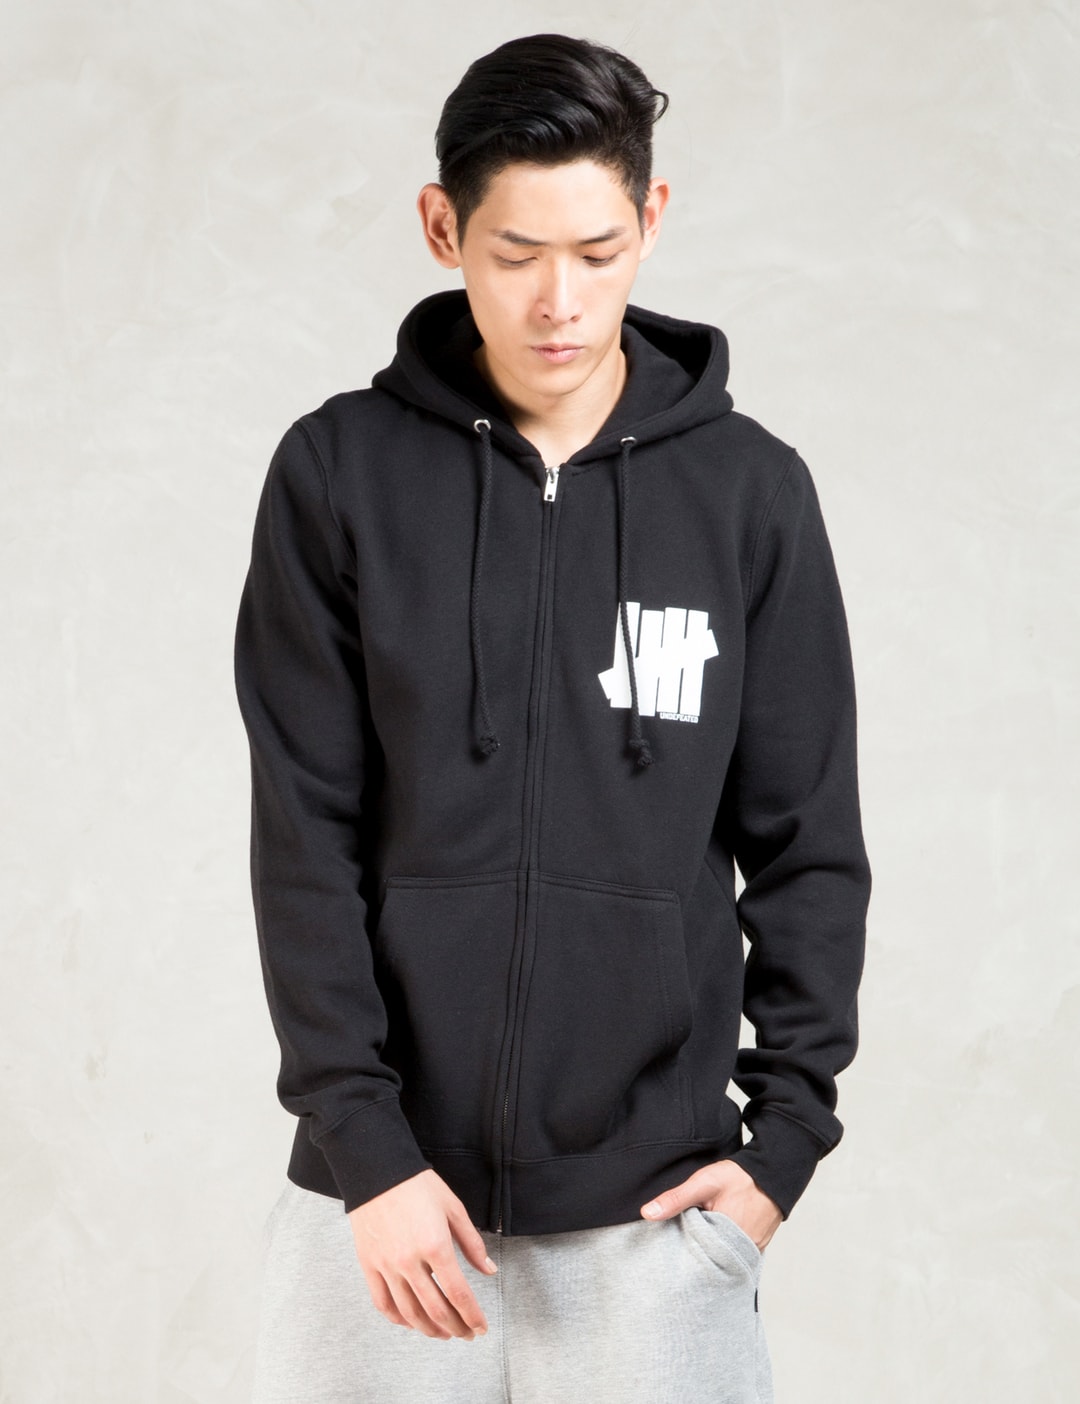 Undefeated - Black Strike Undefeated Zip Hoodie | HBX - Globally ...